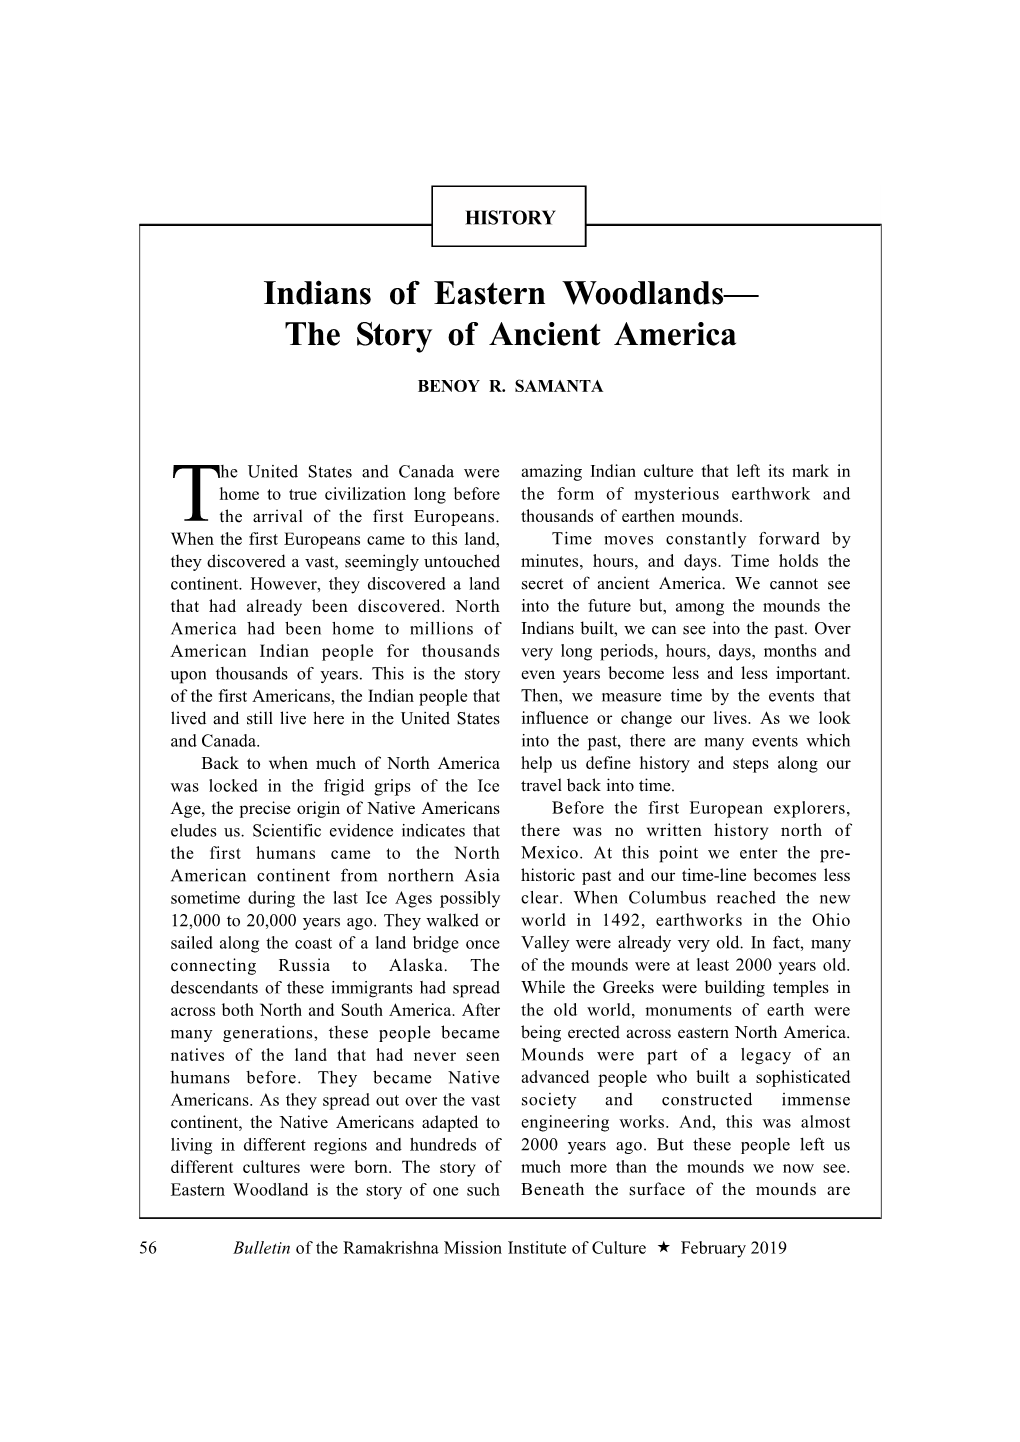 Indians of Eastern Woodlands— the Story of Ancient America